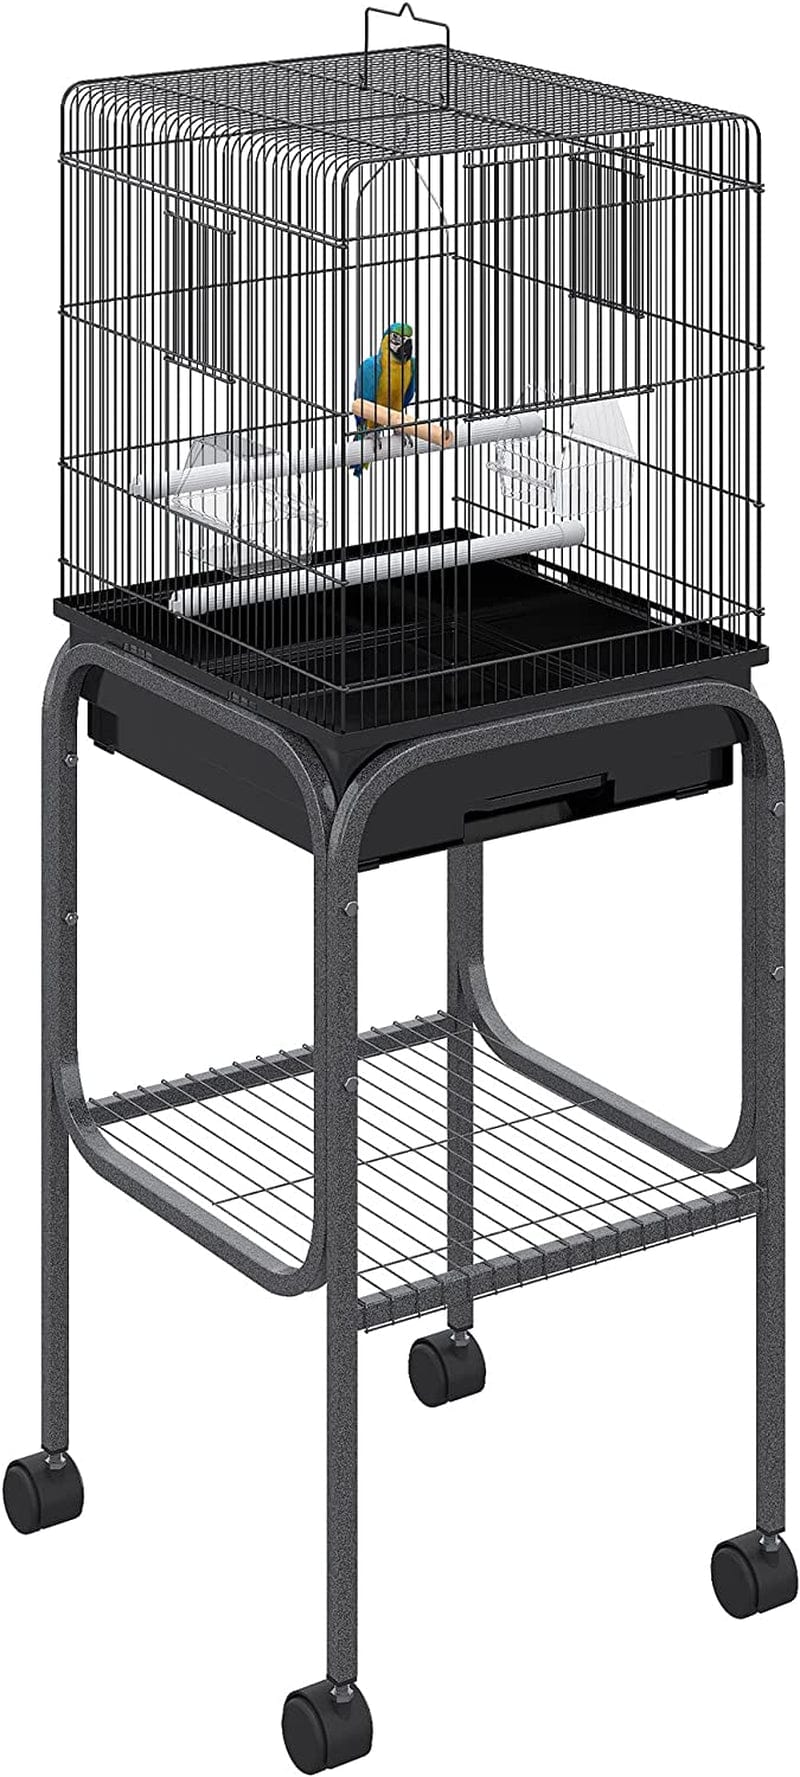 Pawhut 44.5" Metal Indoor Bird Cage Starter Kit with Detachable Rolling Stand, Storage Basket, and Accessories - Black